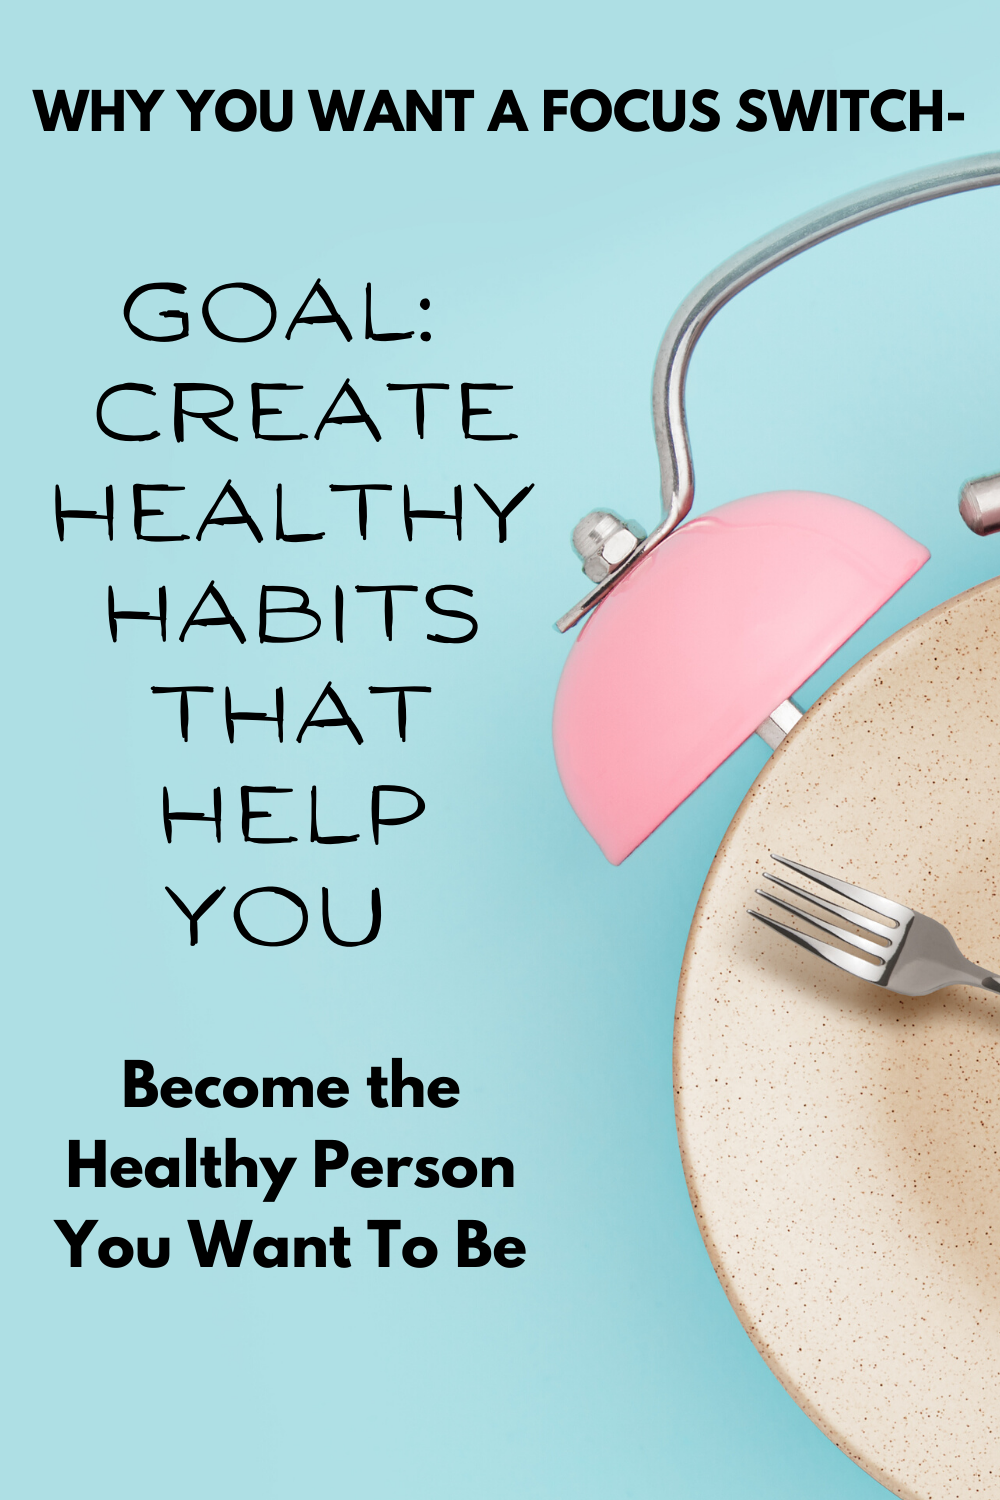 A Focus Switch-The Goal:Create Healthy Habits That Help You Become A Healthy Person You Want To Be